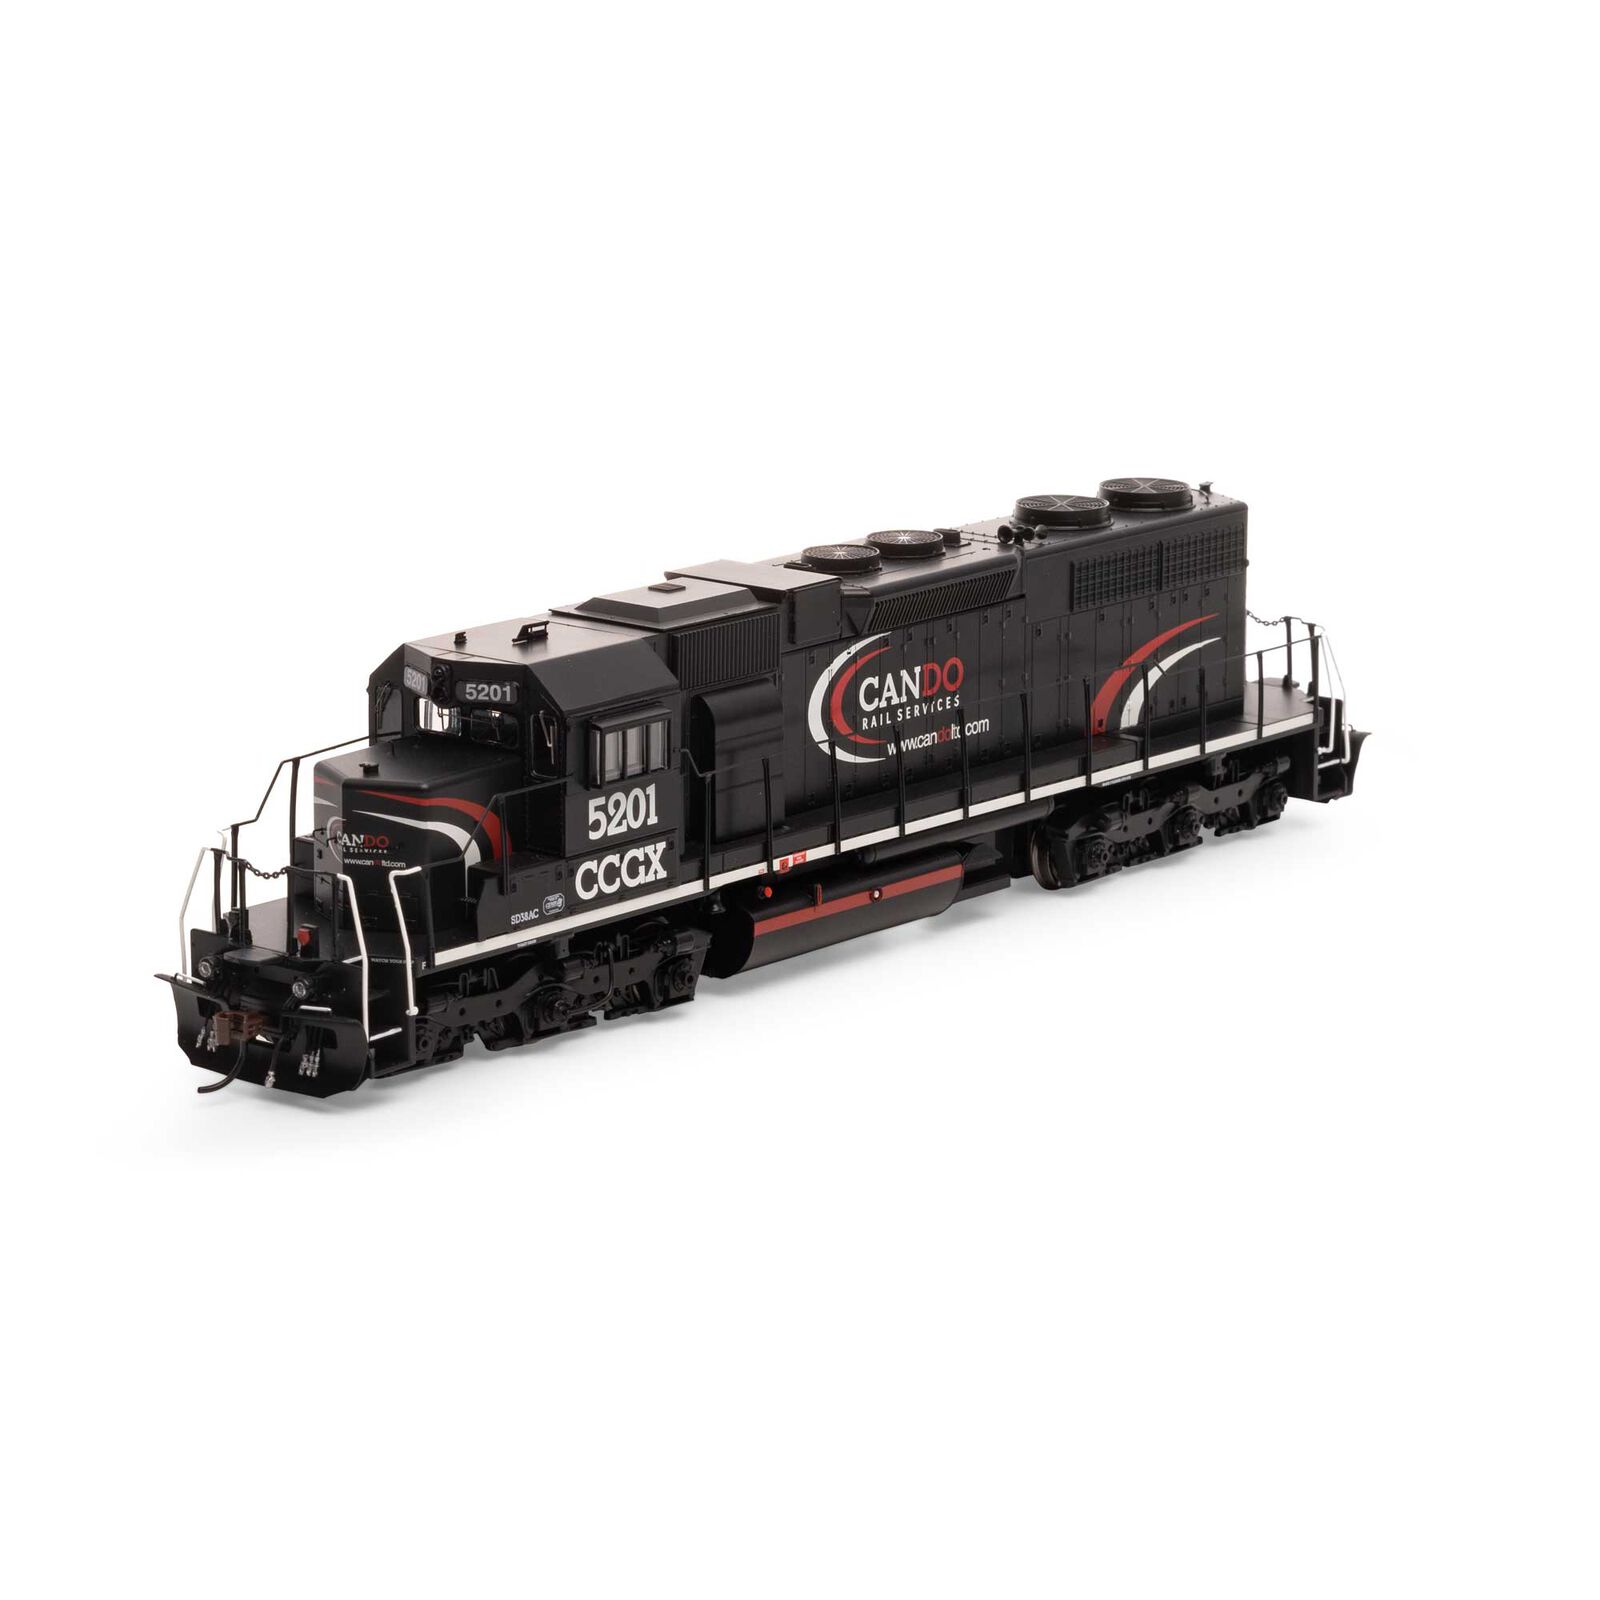 HO RTR SD38 with DCC & Sound, CCGX #5201